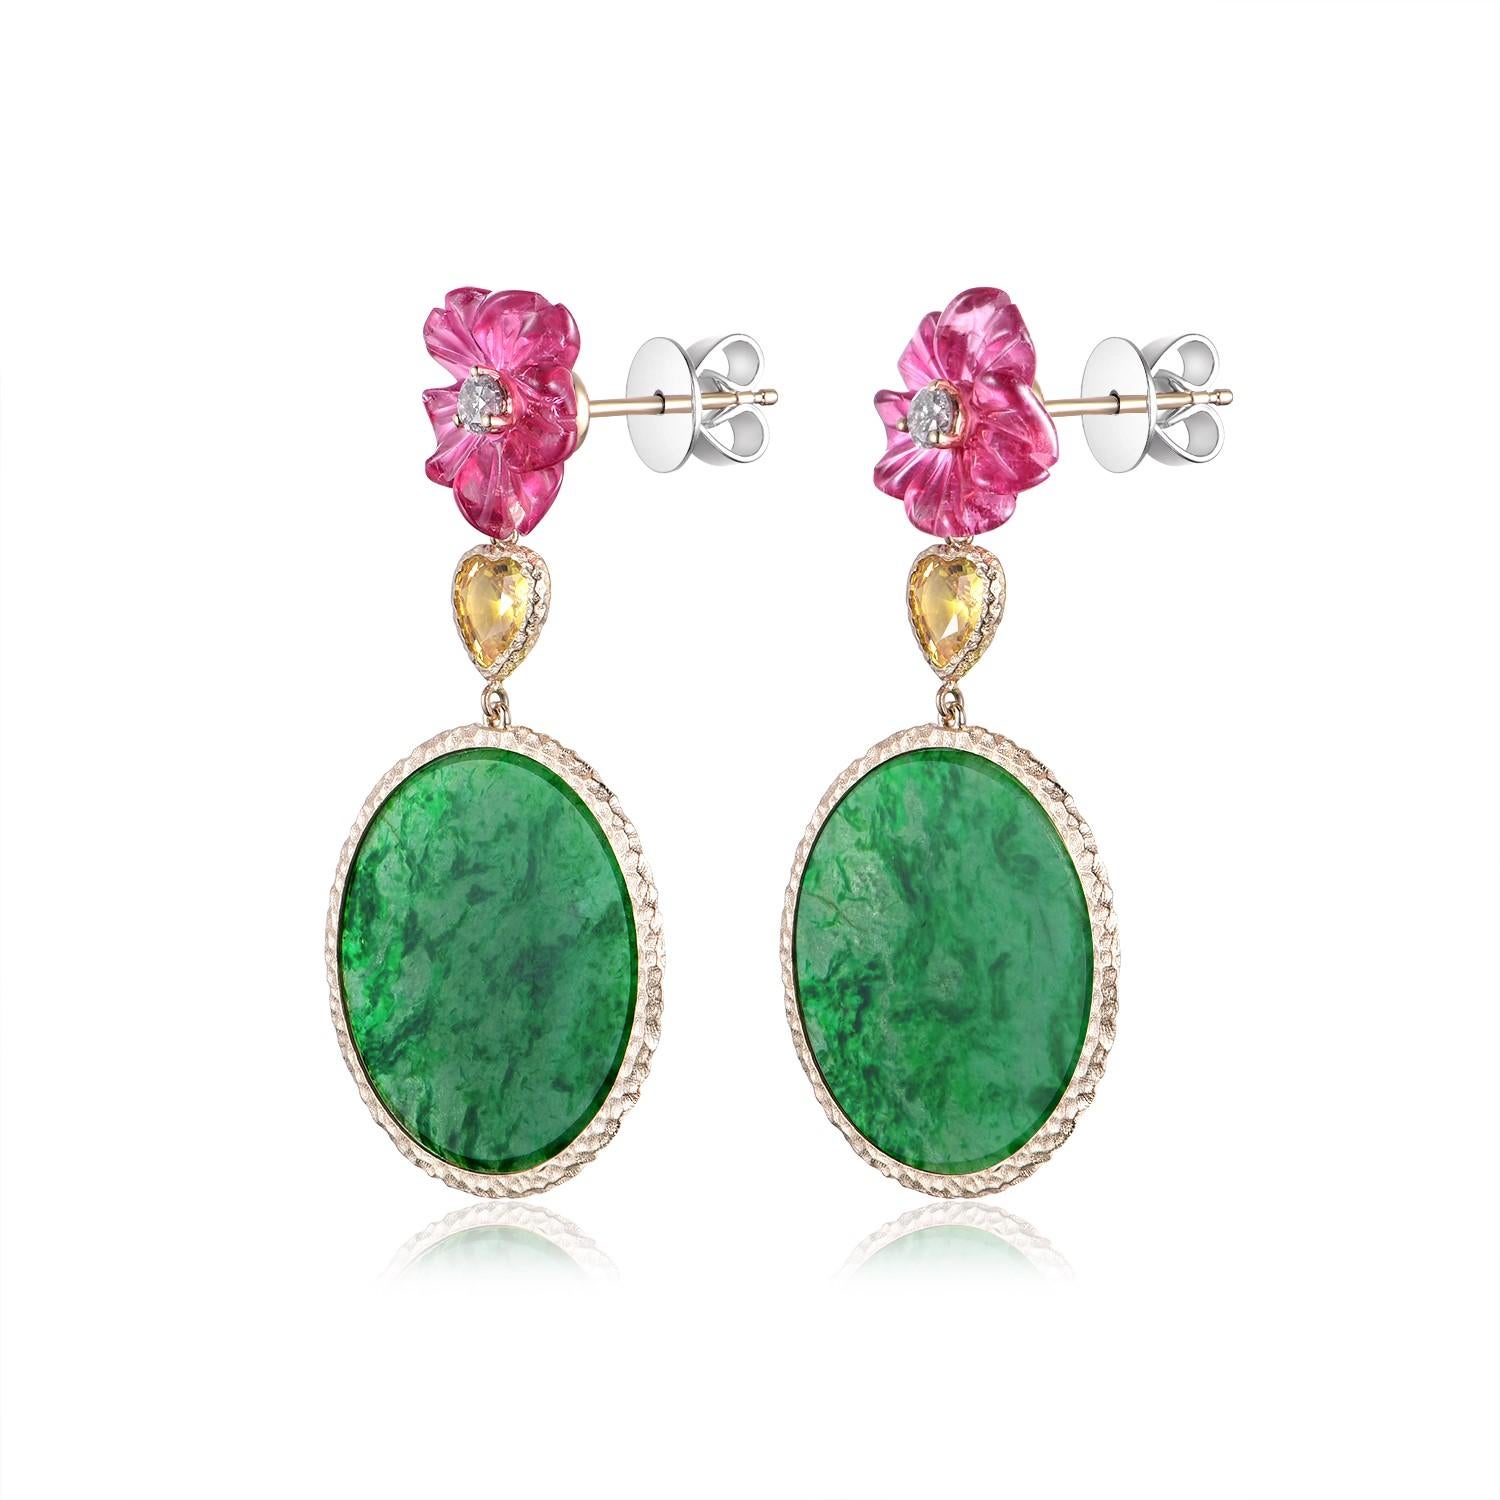 This captivating pair of earrings features a luxurious combination of gemstones set in 14 karat yellow gold. The design is a harmonious blend of color and elegance, with each earring showcasing a substantial 5.95 carat jadeite. The jadeite displays